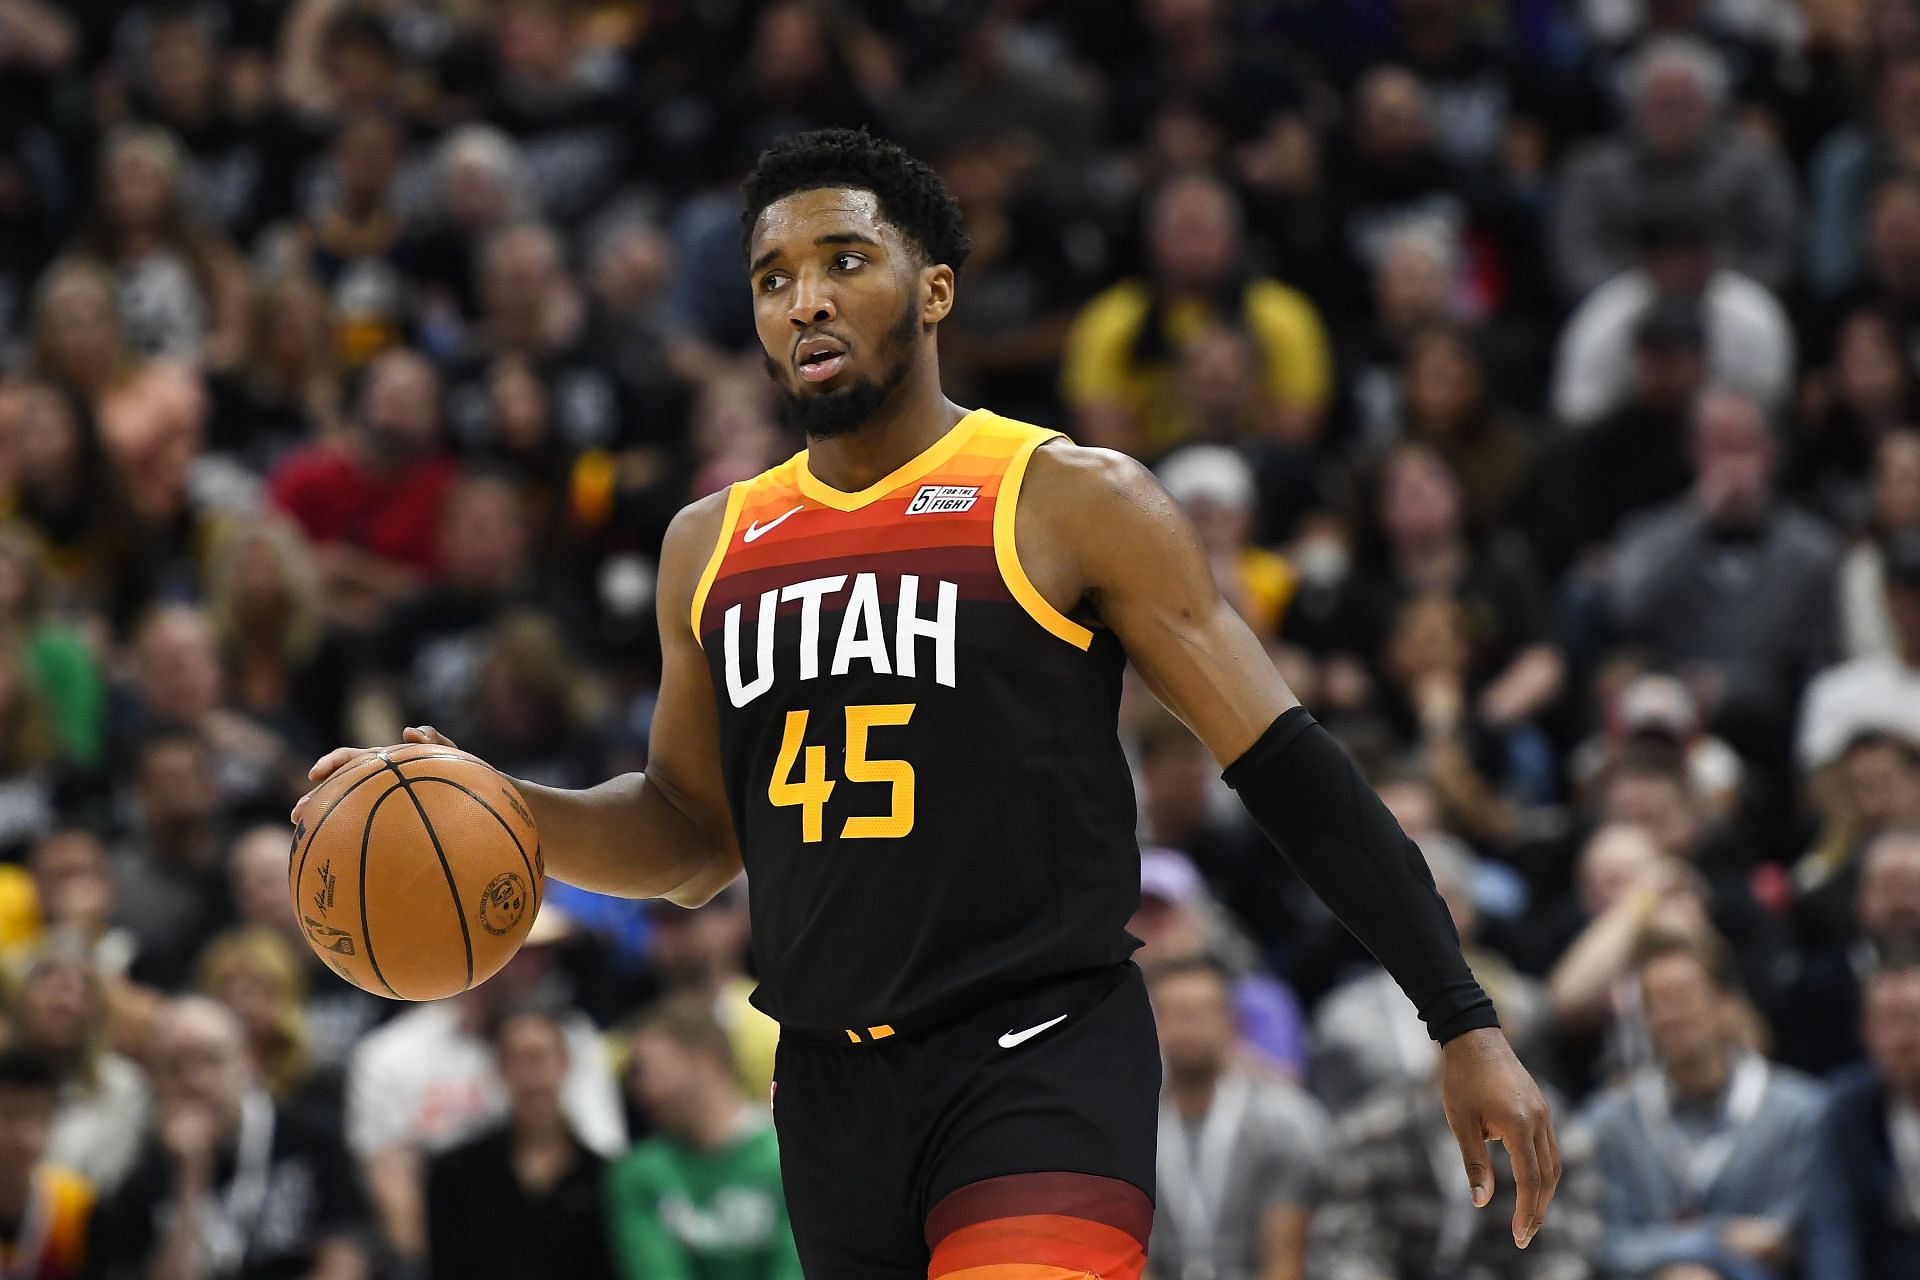 Jay Williams believes the New York Knicks should go all in for Utah Jazz star Donovan Mitchell